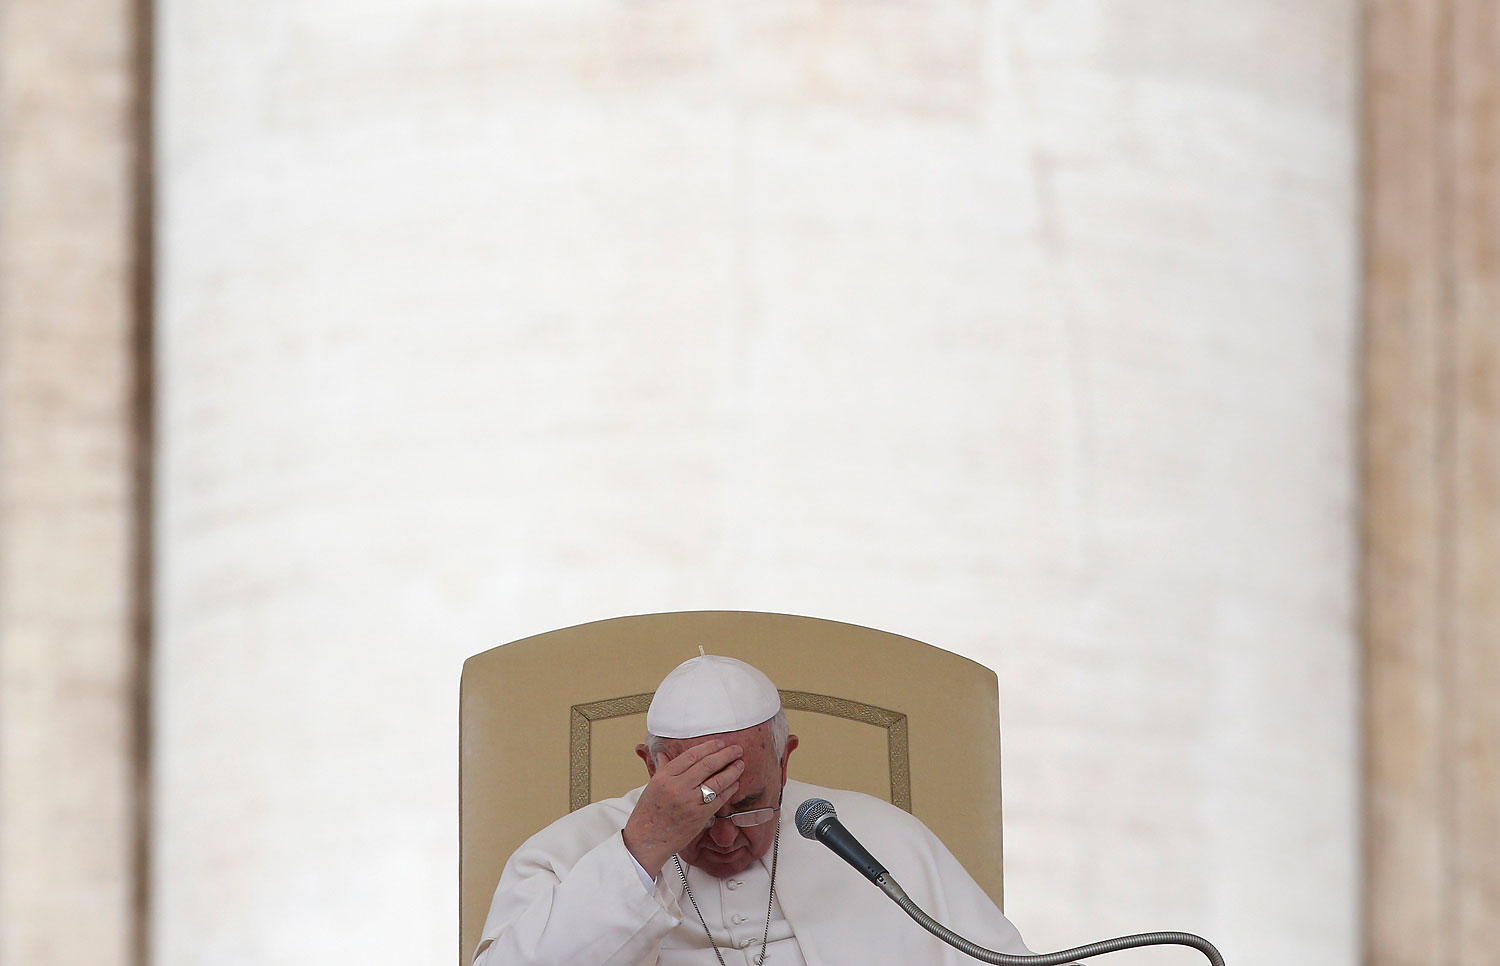 Pope Francis touches his forehead as he leads the general audience in Saint Peter's square at the Vatican, April 9, 2014.